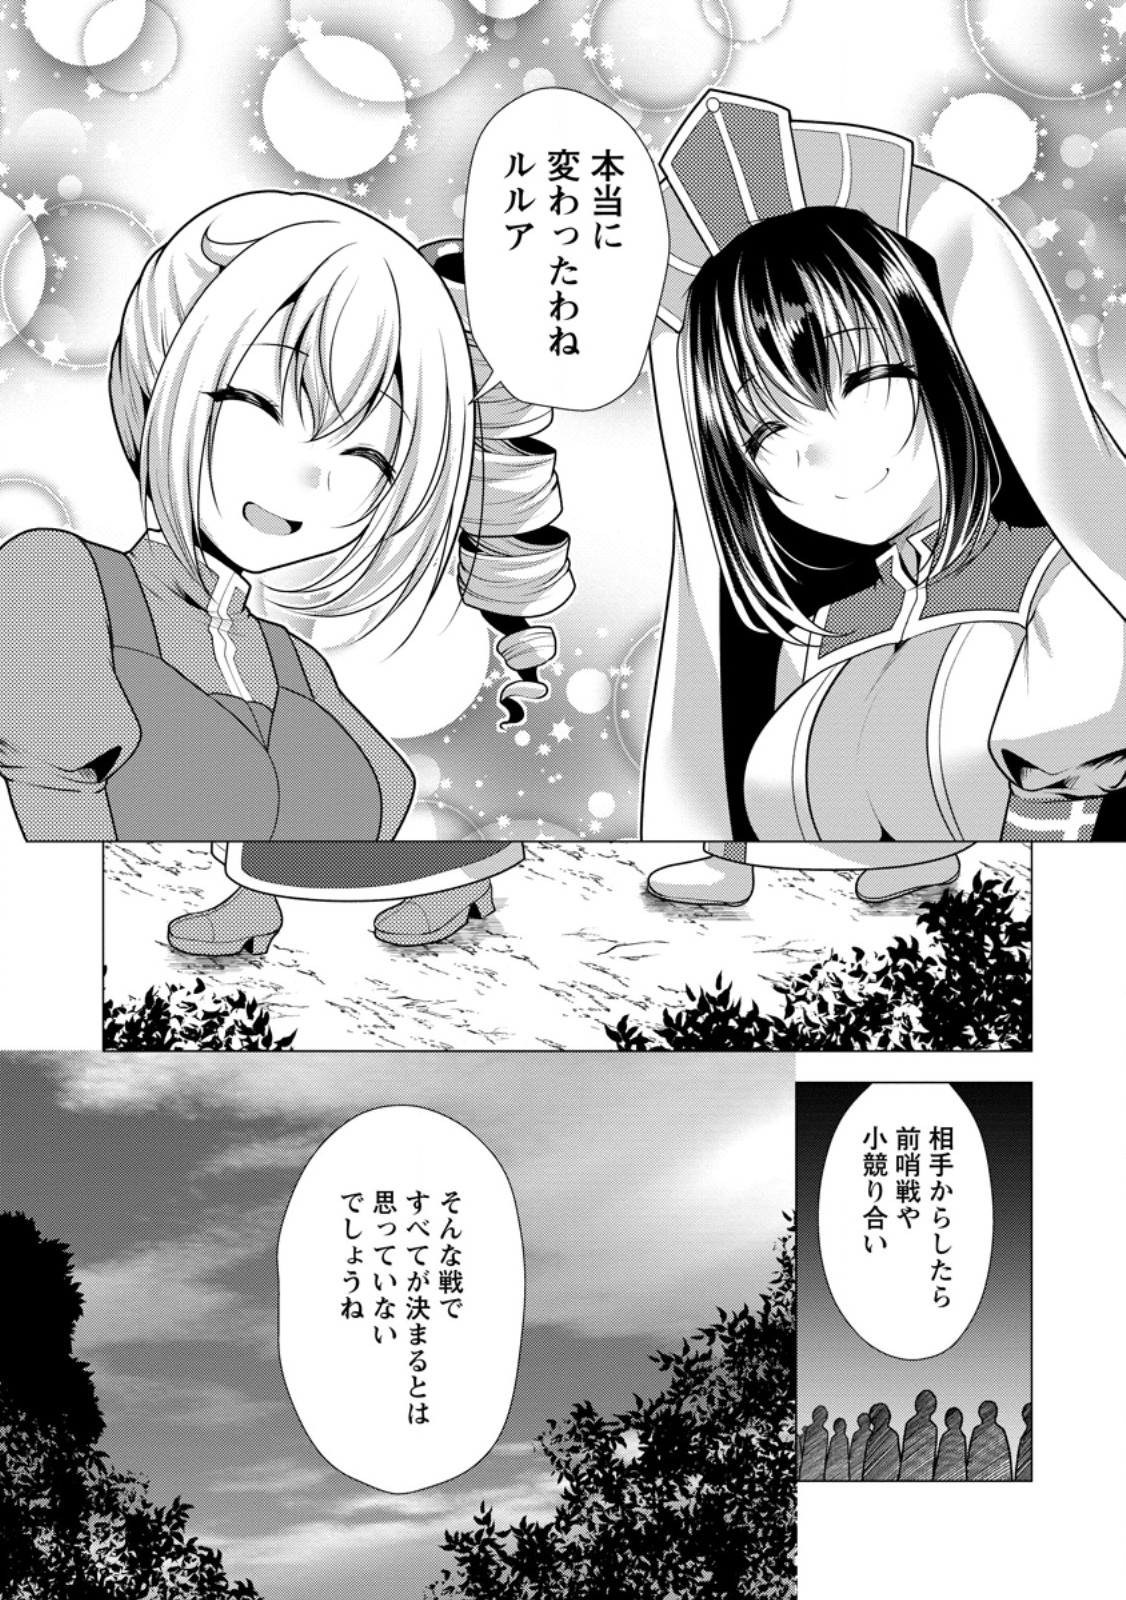 Hisshou Dungeon Unei Houhou - Chapter 61.1 - Page 9